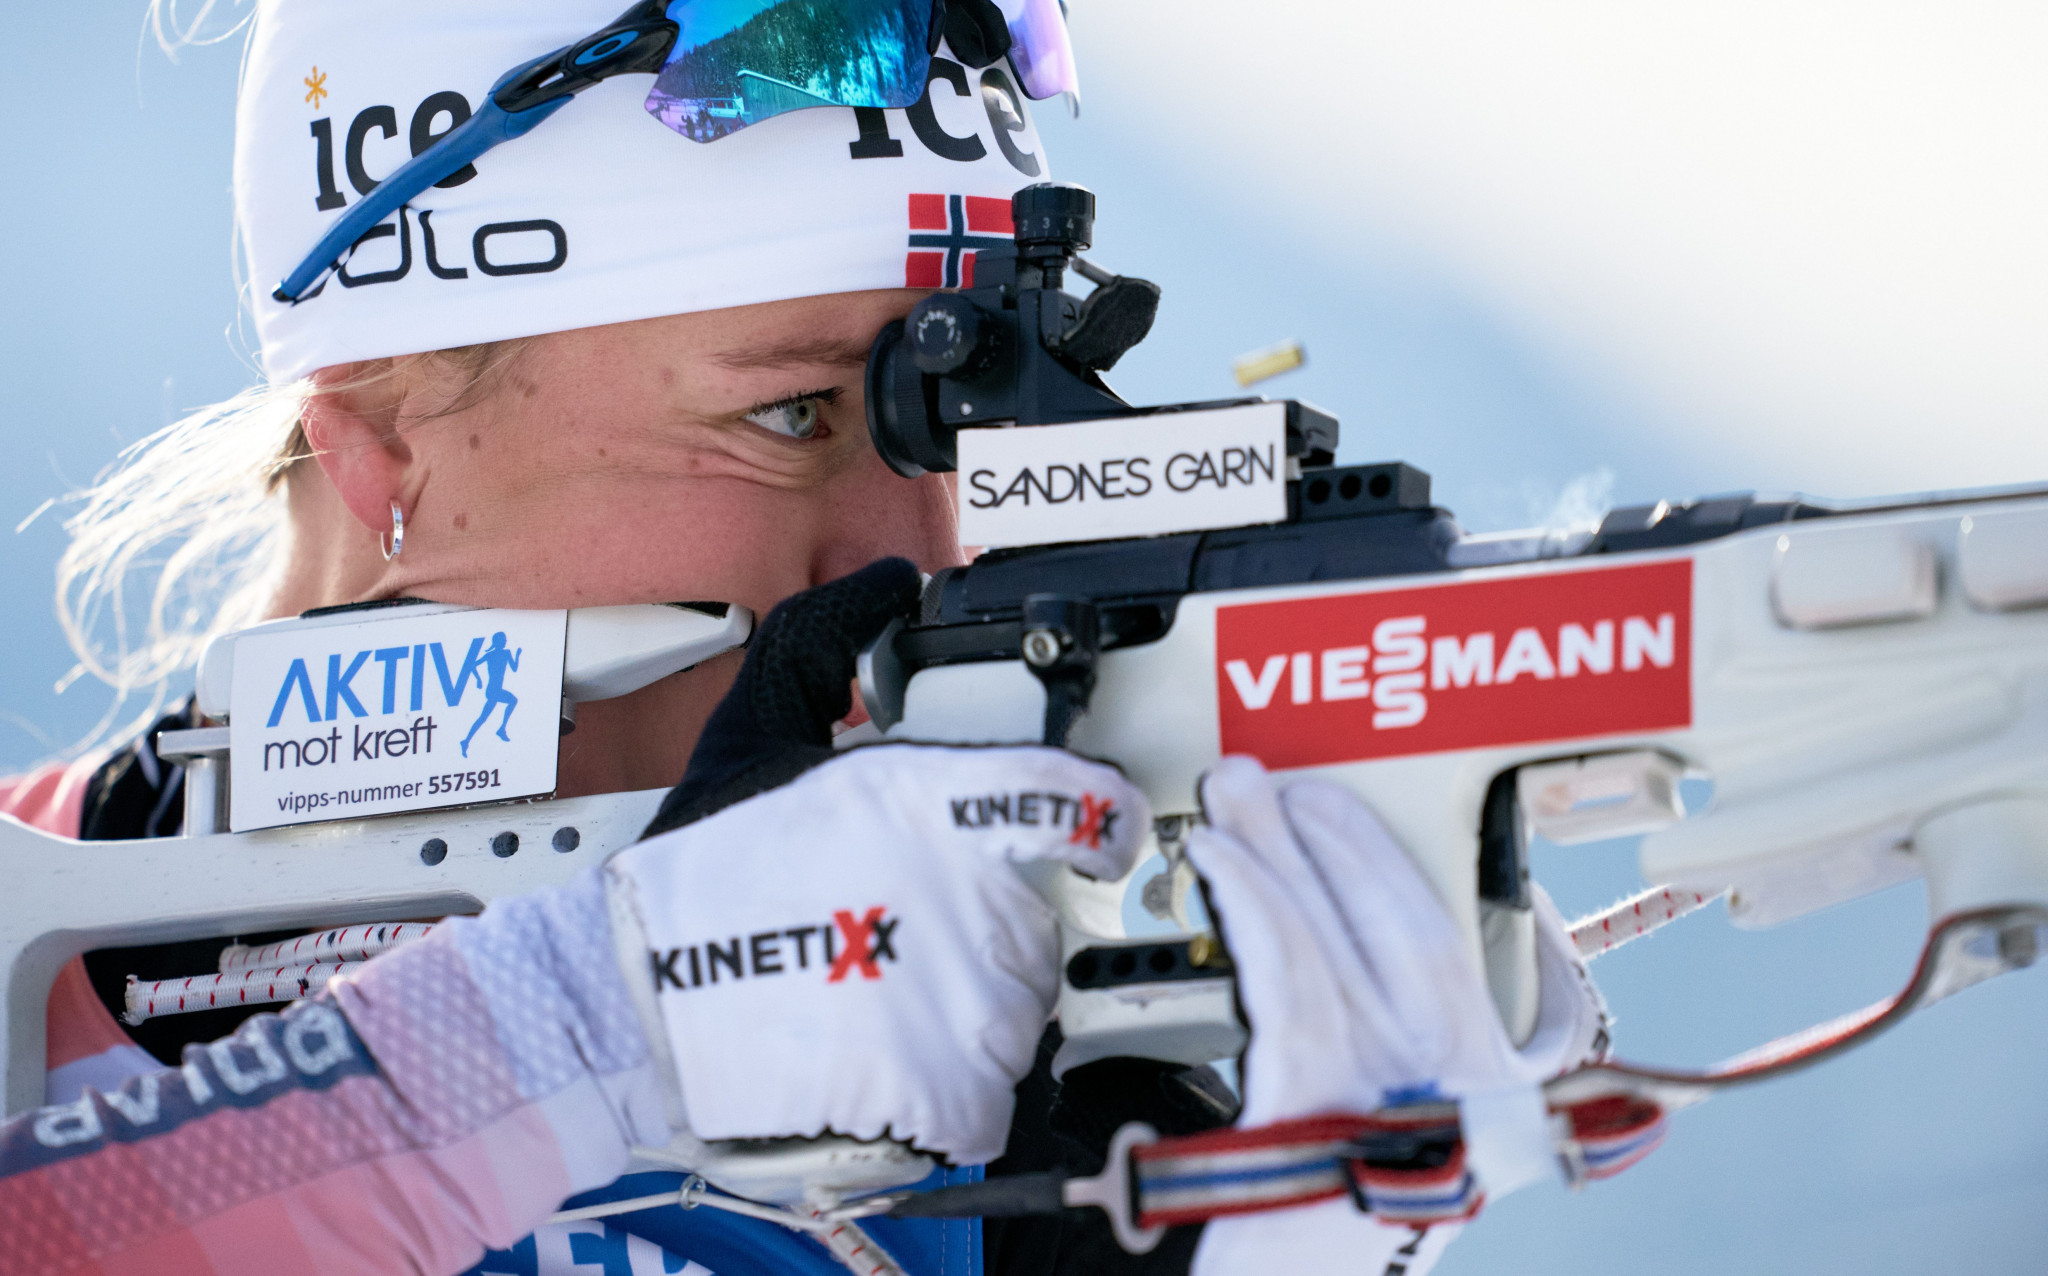 Perfect shooting propels Eckhoff to first pursuit victory at IBU World Cup